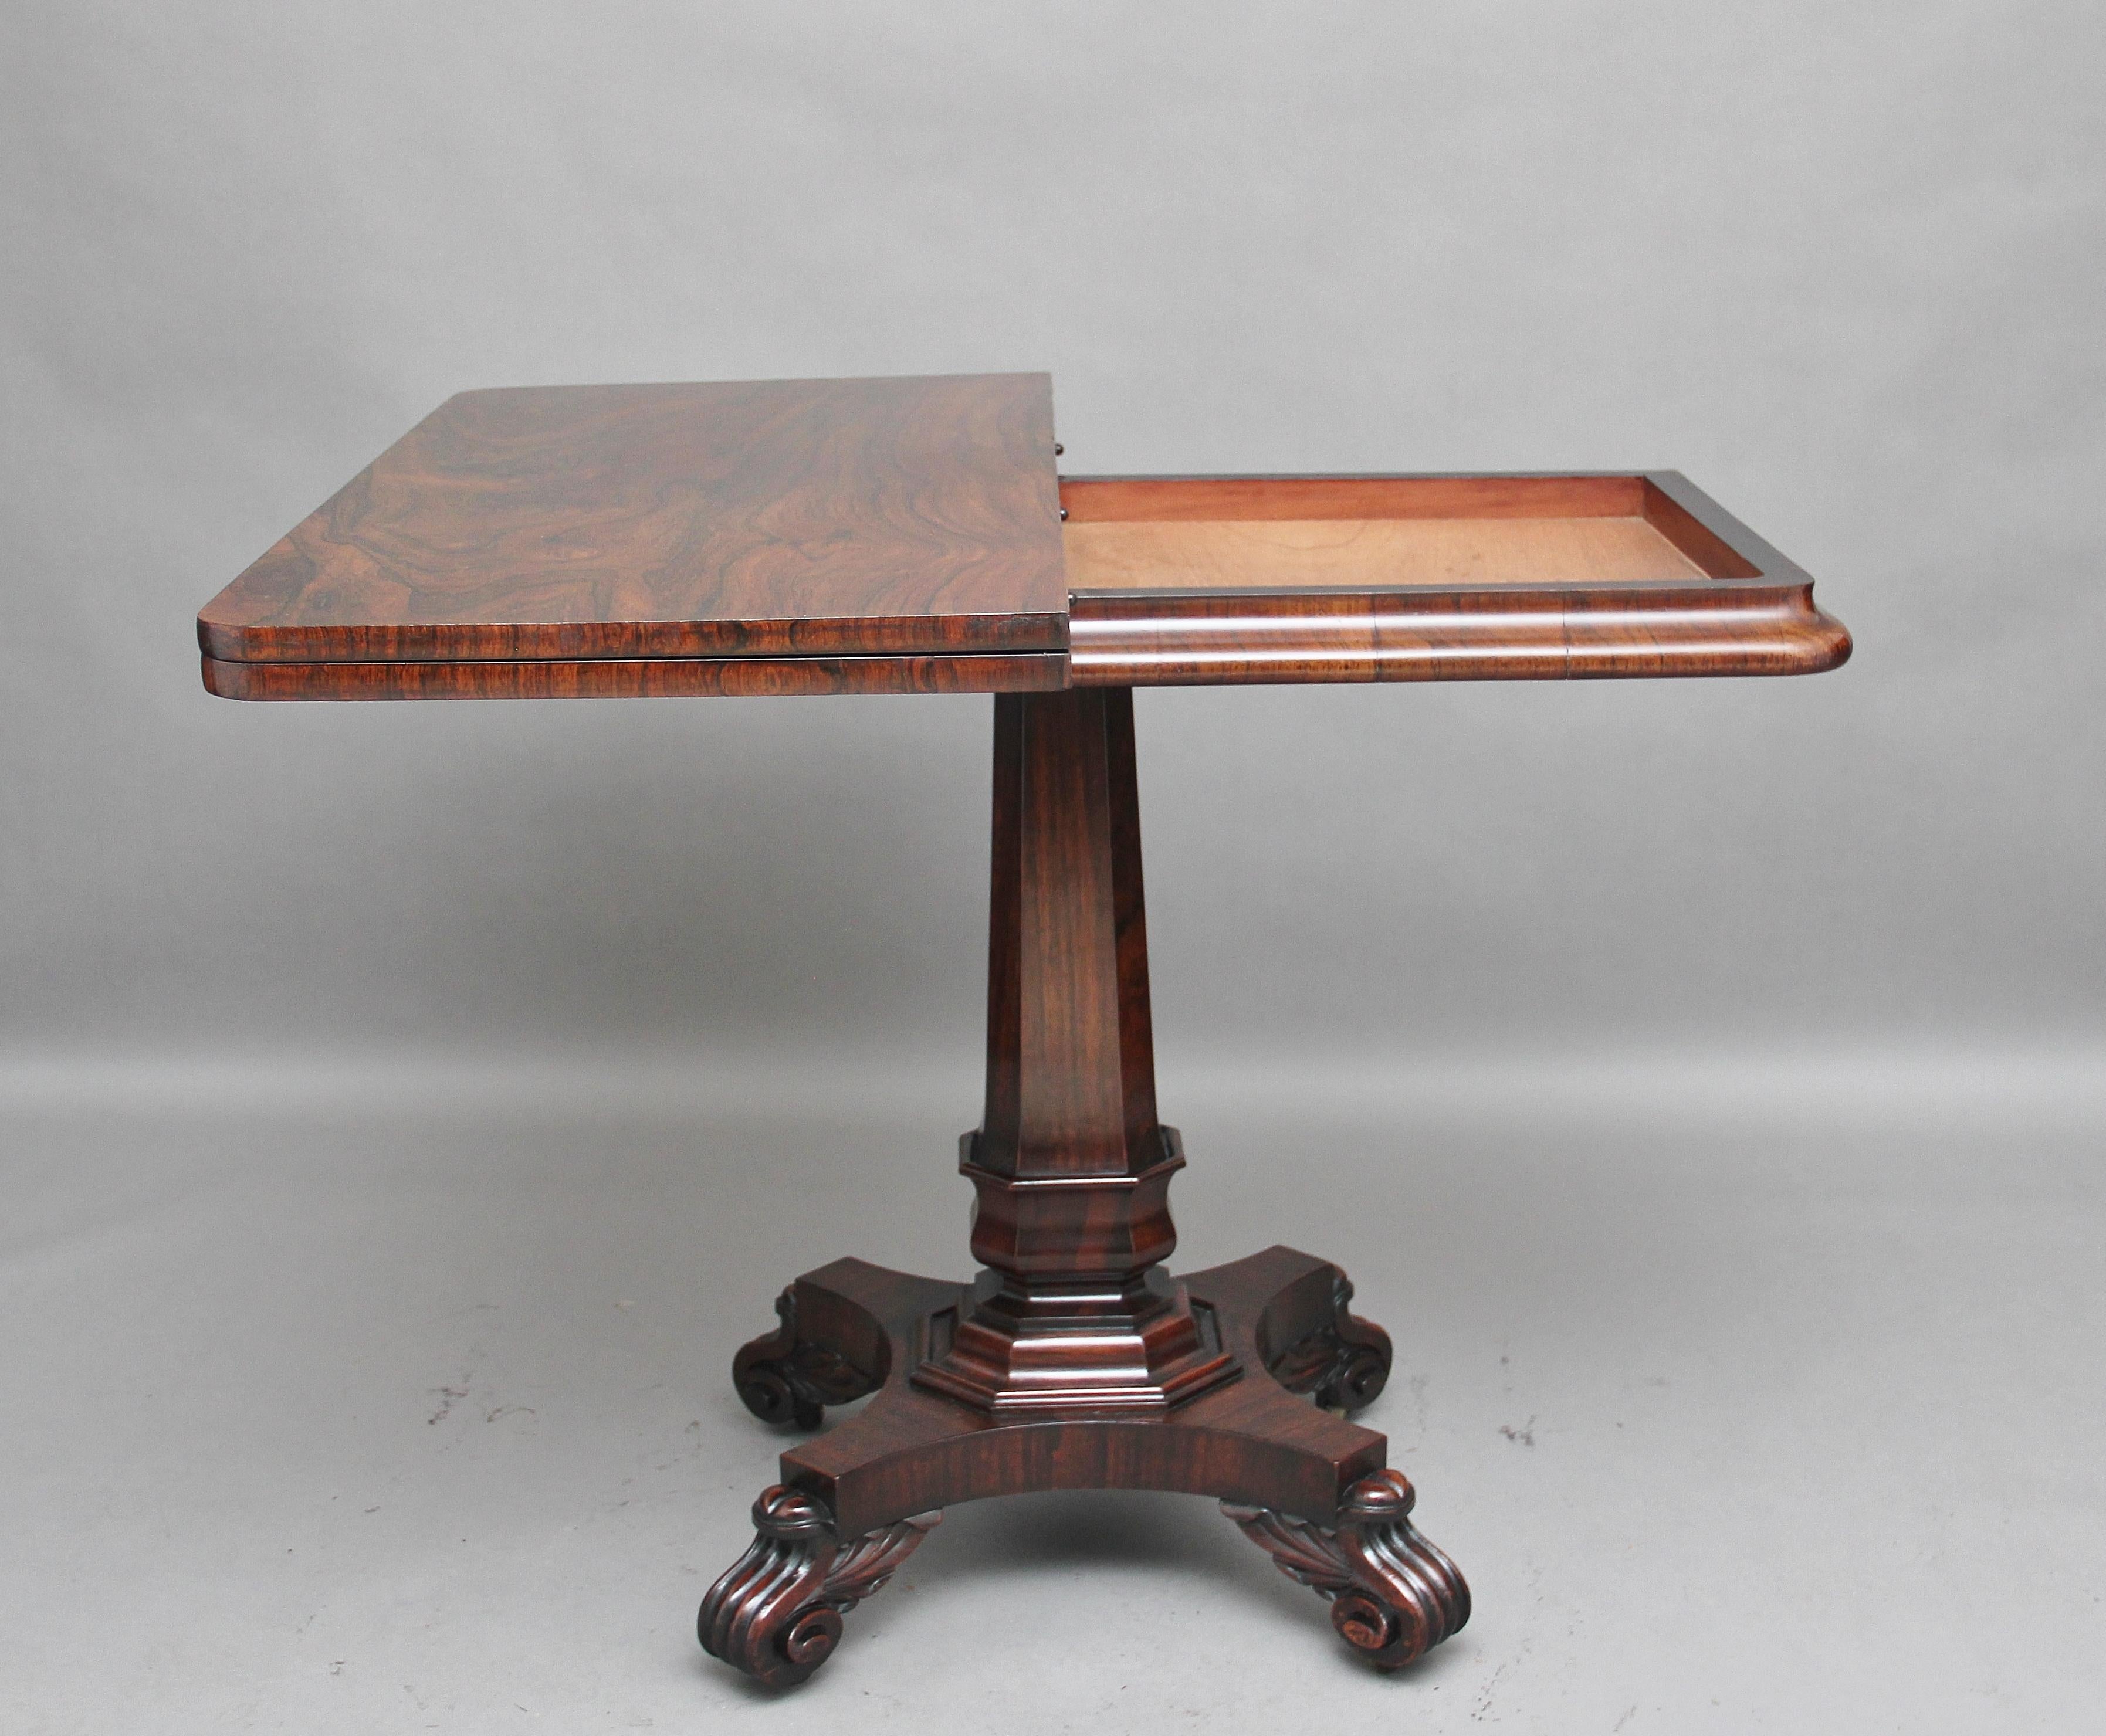 19th century rosewood card table, the moulded rectangular top turning and opening to reveal a green baize playing surface, supported on an elegant shaped column standing on a shaped platform base with four carved scroll feet. Lovely color and in